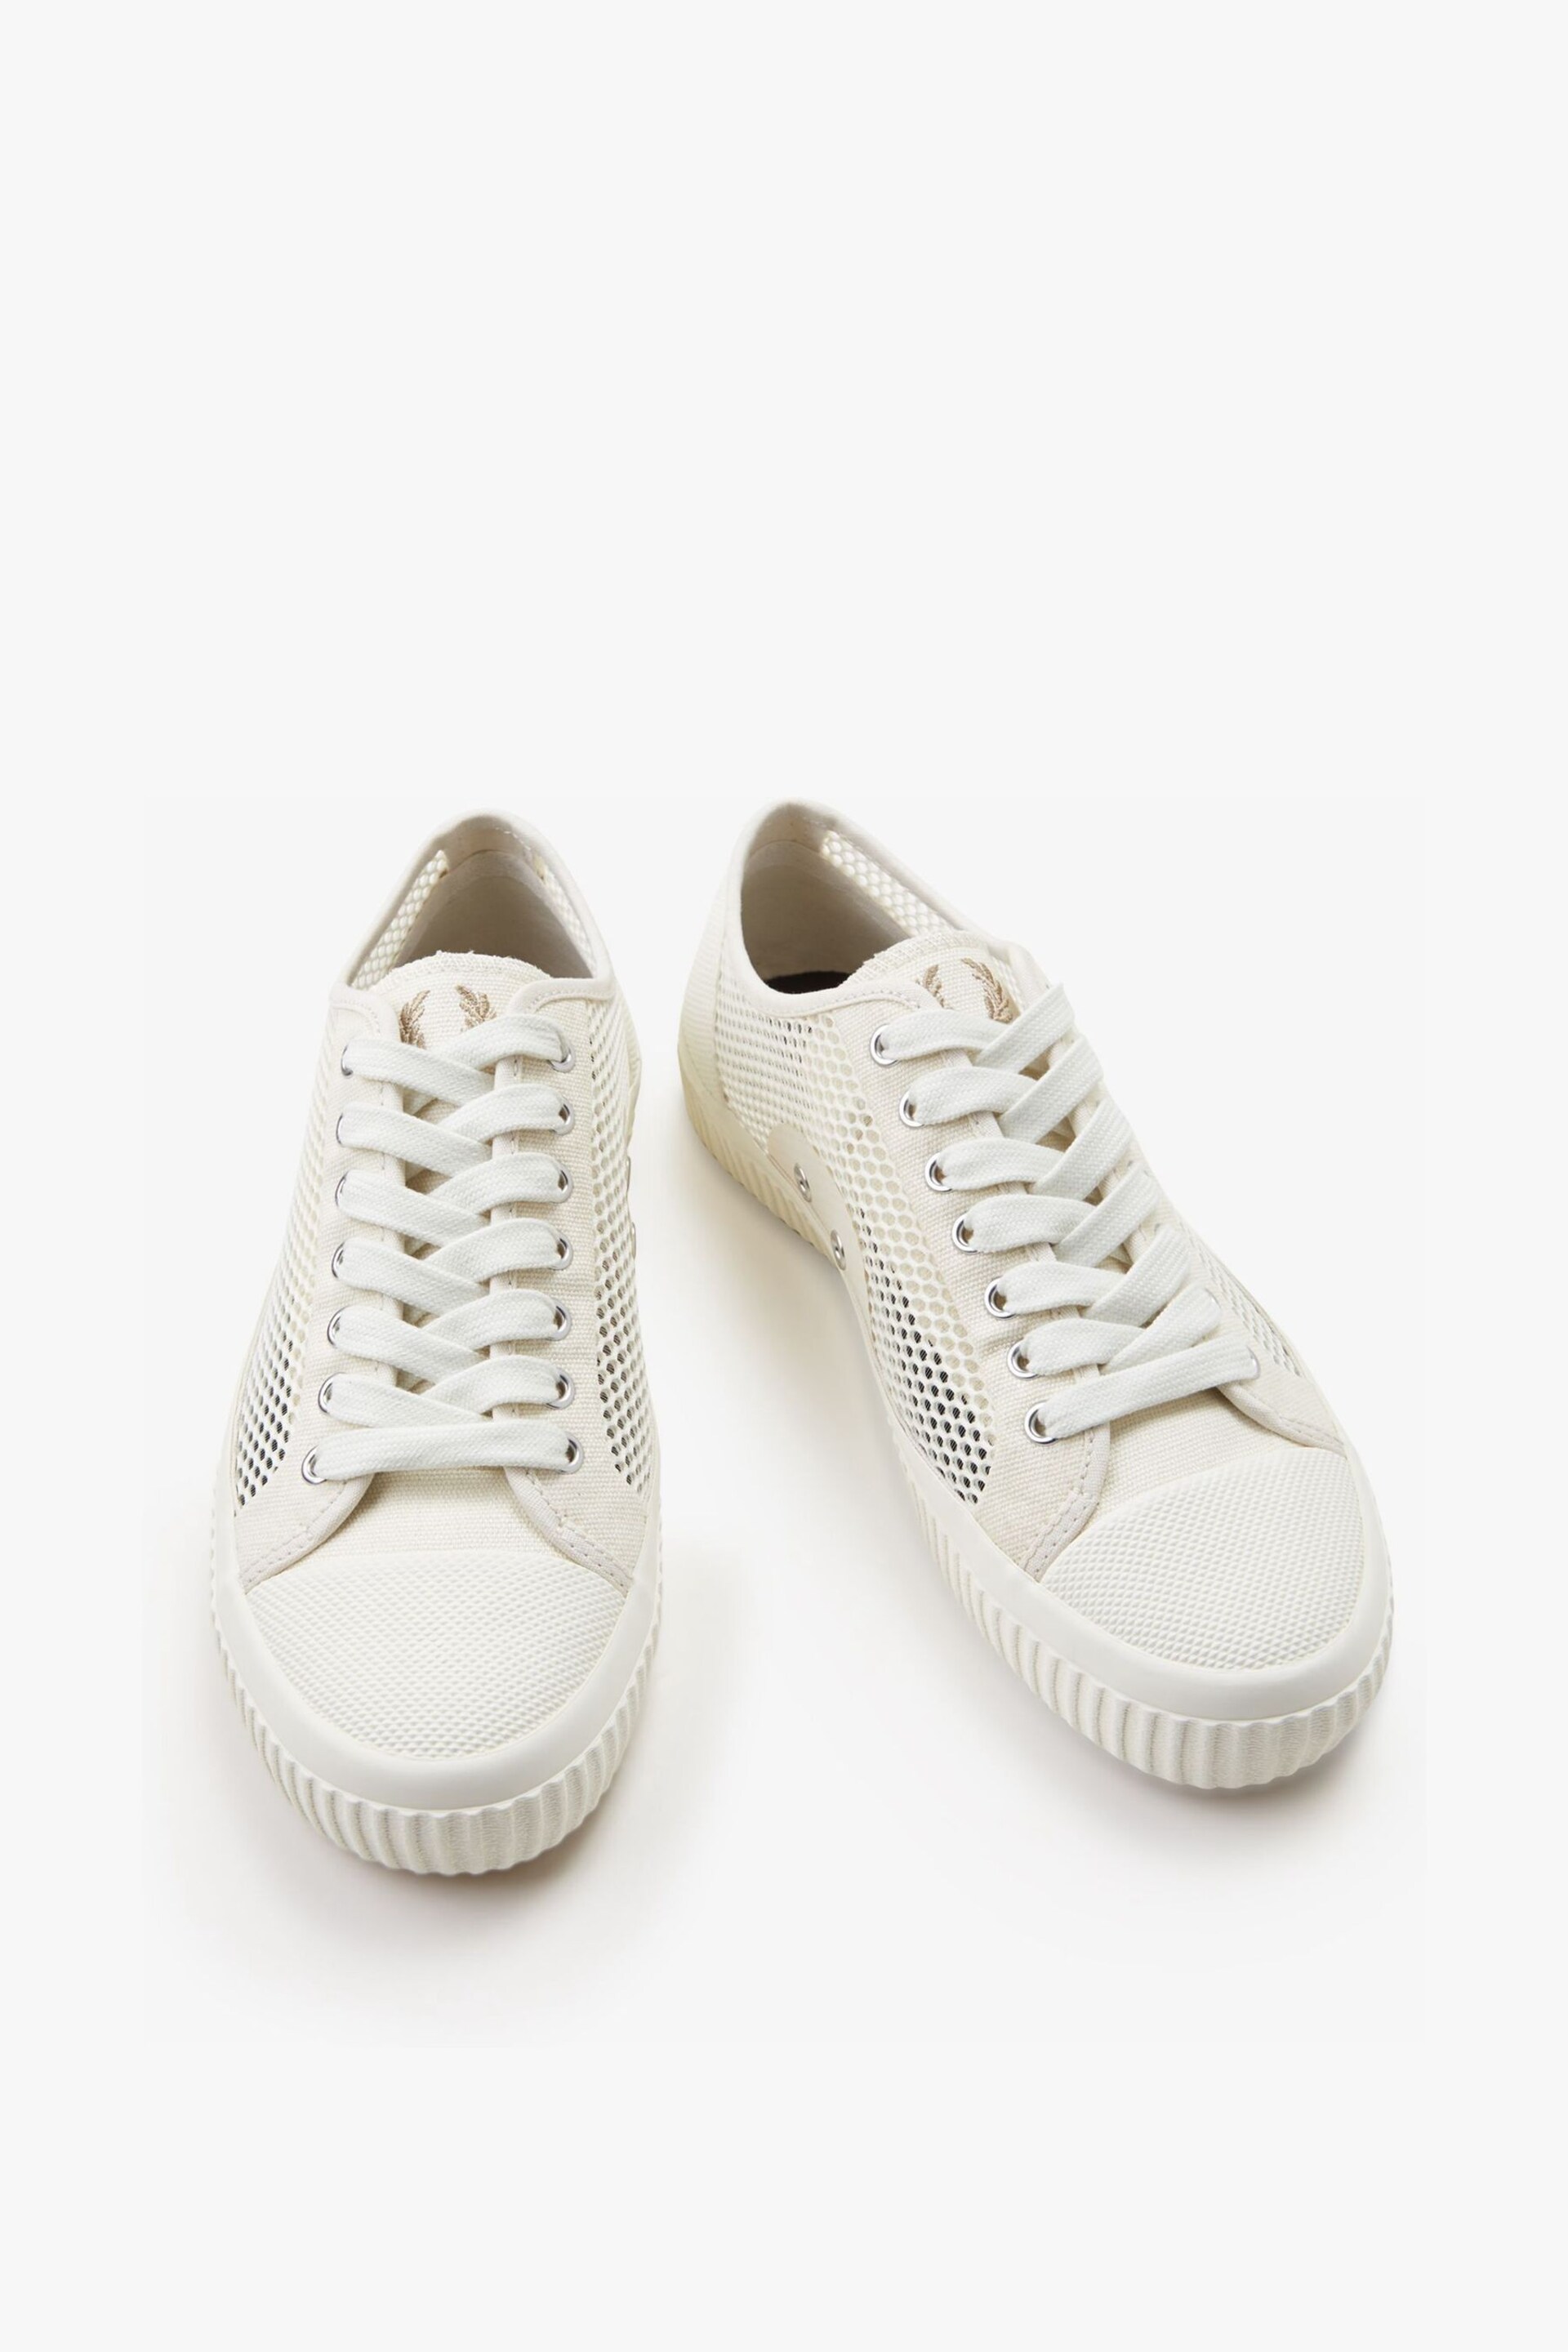 Fred Perry Womens Ecru White Hughes Mesh Trainers - Image 3 of 5